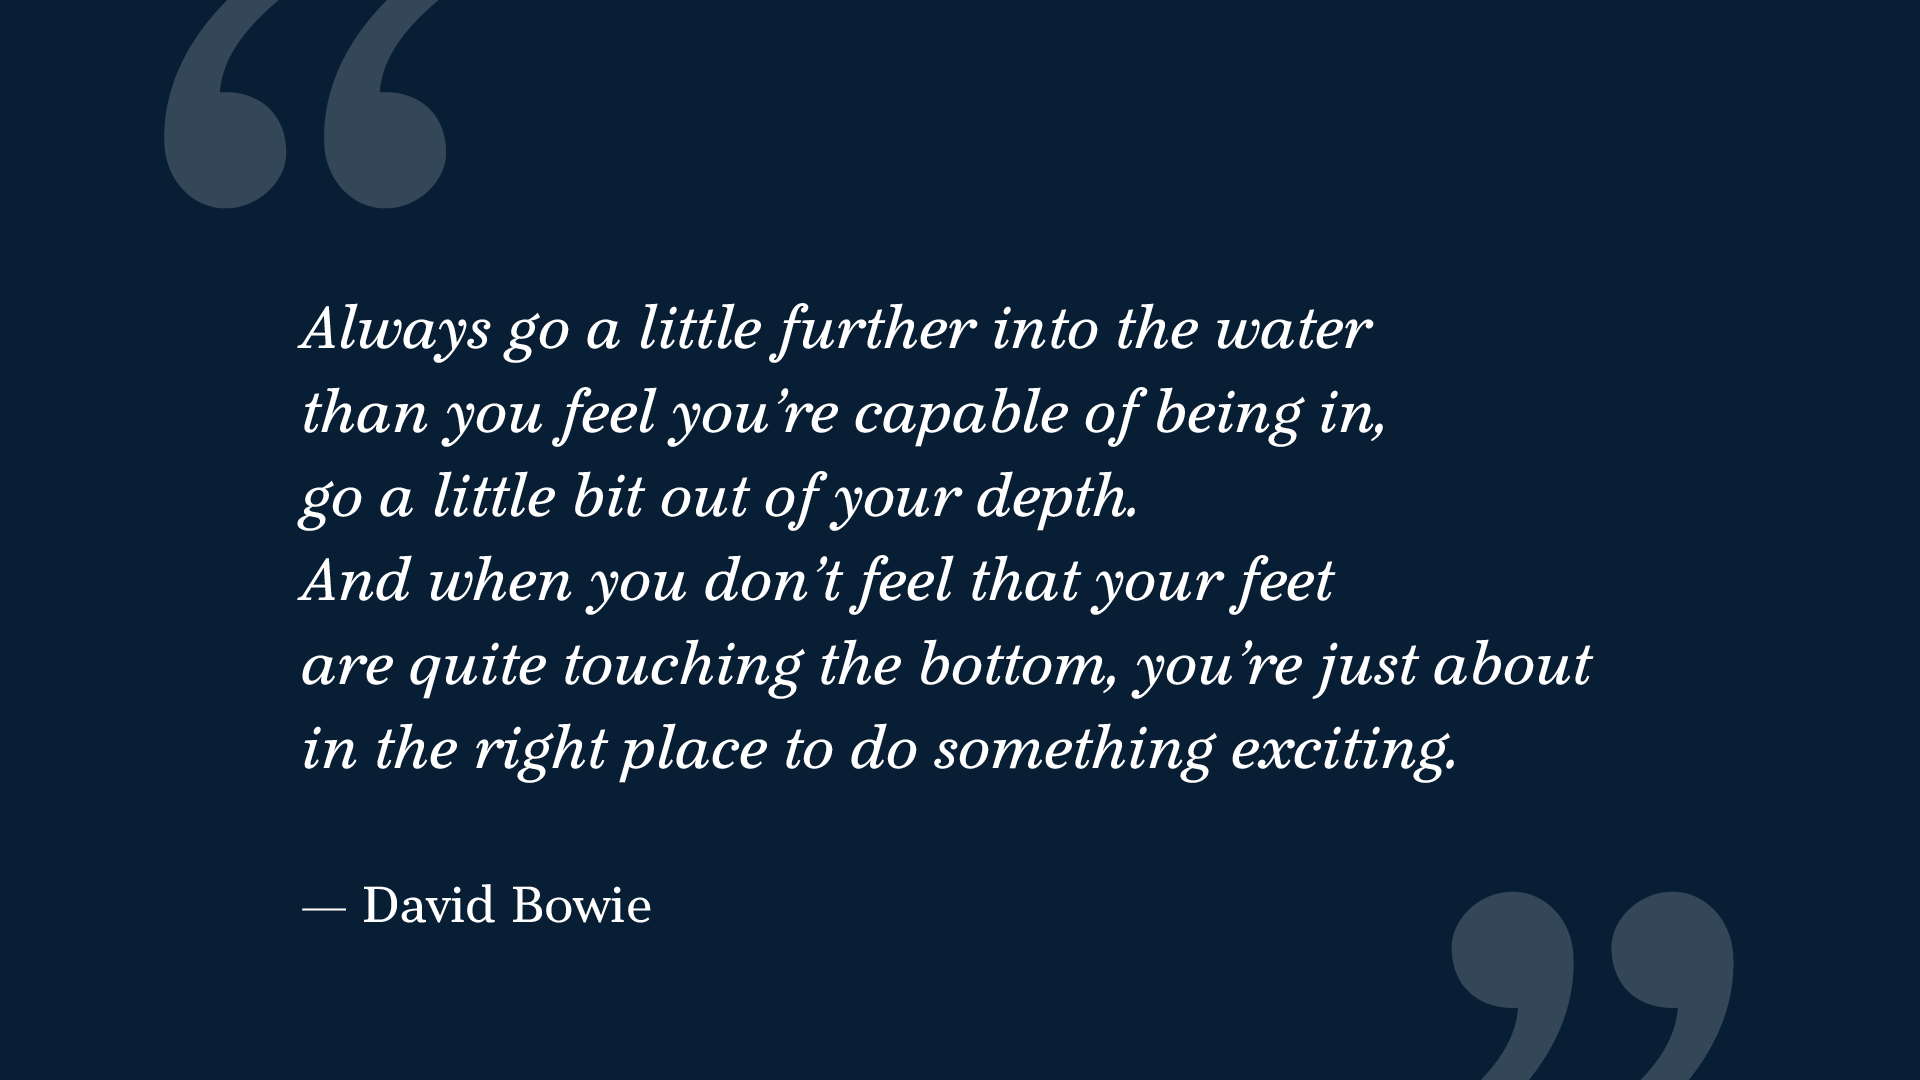 Quote by David Bowie, in Explorama typeface. The quote says: "Always go a little further into the water than you feel you’re capable of being in, go a little bit out of your depth. And when you don’t feel that your feet are quite touching the bottom, you’re just about in the right place to do something exciting.